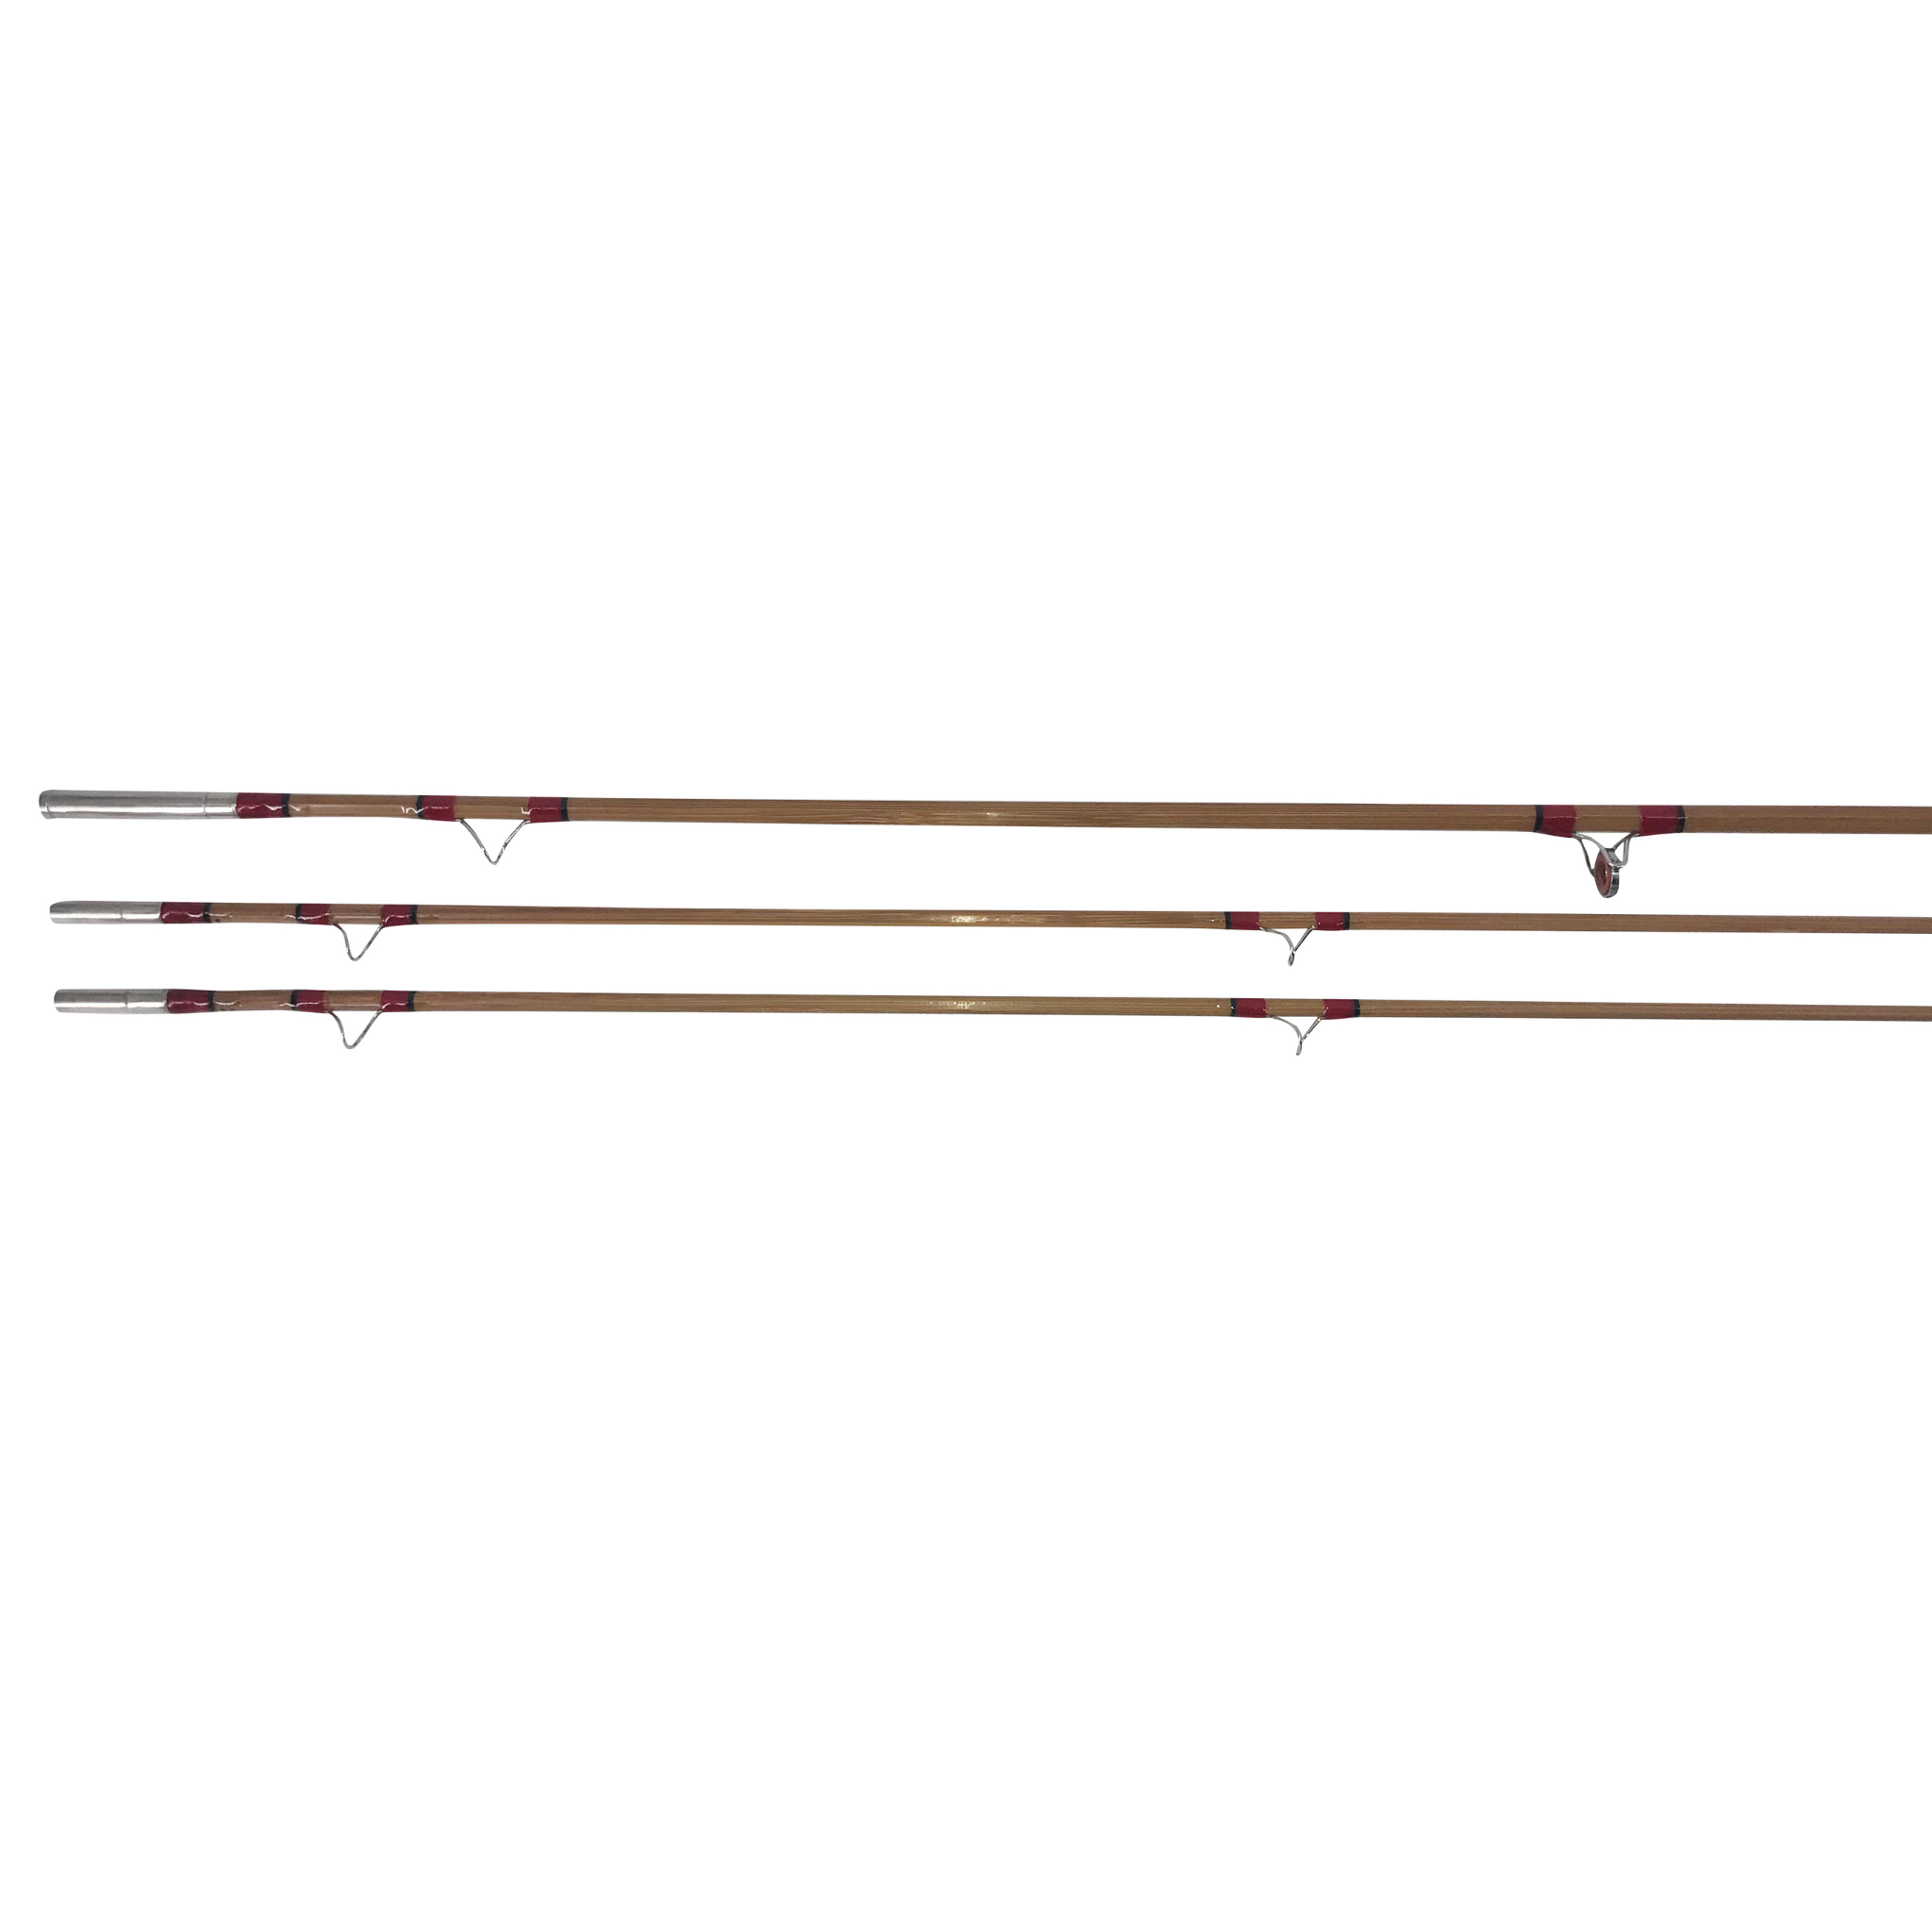 New Bamboo Fly Rod 7'0 #4,2 Piece 2 Tips with Nickel Silver Reel Seat and  Agate Strip Guide. : Sports & Outdoors 